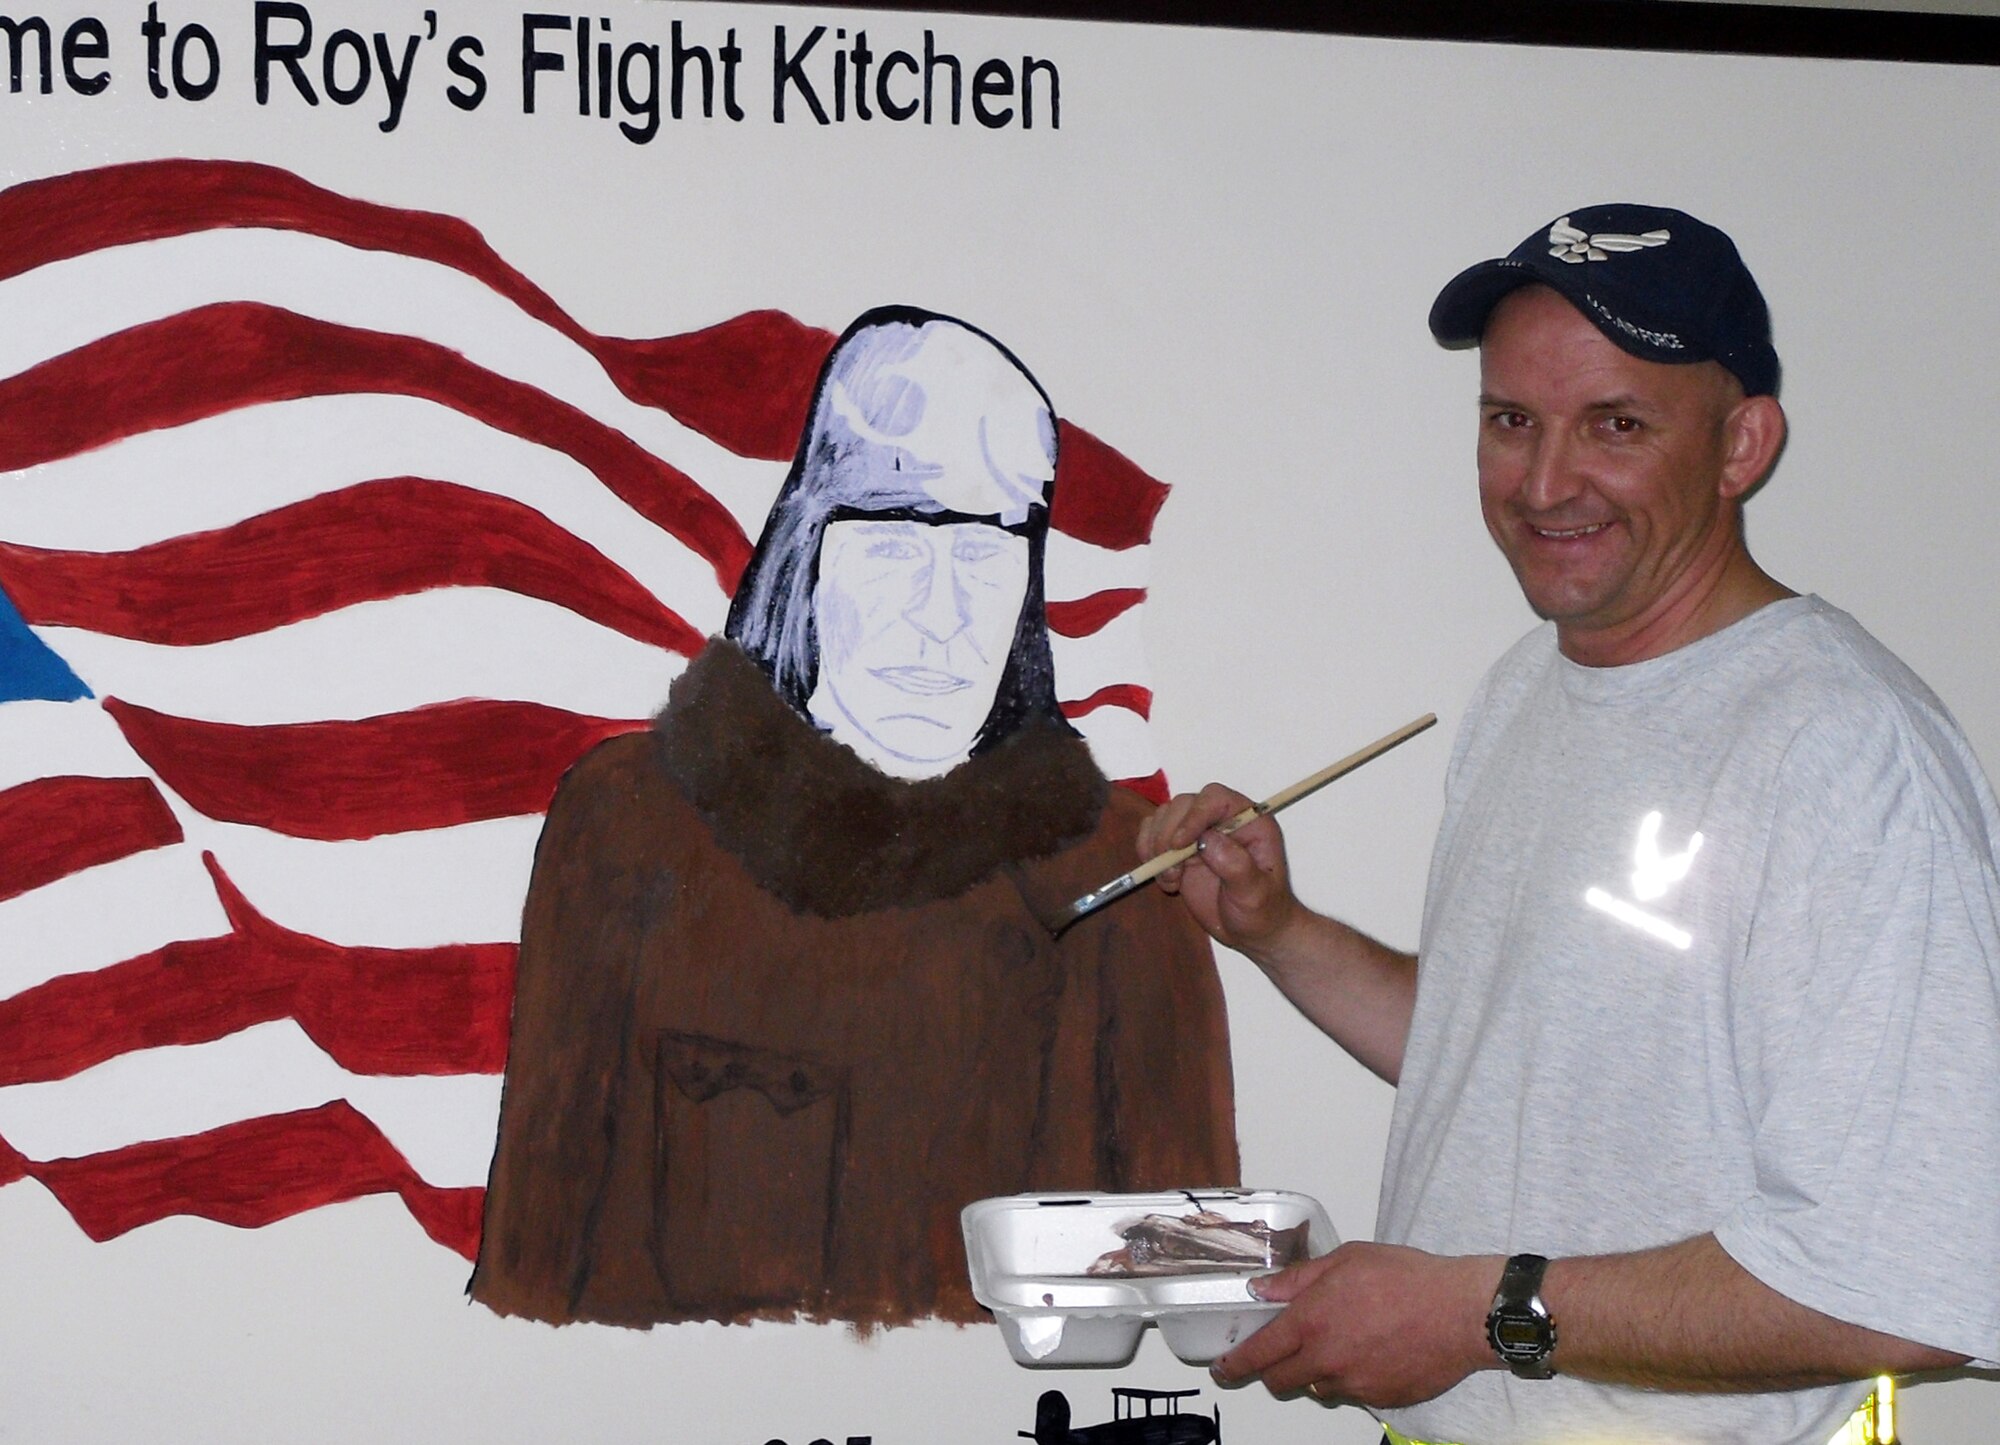 Master Sgt. Scott Sturkol, superintendent of 380th Air Expeditionary Wing Public Affairs at a non-disclosed base in Southwest Asia, works on a mural April 18, 2010 at Roy's Flight Kitchen in the operations area for the wing honoring Master Sgt. Roy Hooe for whom the flight kitchen is named after. Sergeant Hooe is best known for his support of the first air refueling mission with the "Question Mark." Sergeant Sturkol is deployed from the Headquarters Air Mobility Command Public Affairs at Scott Air Force Base, Ill., and his hometown is Wakefield, Mich. (U.S. Air Force Photo/Master Sgt. Scott T. Sturkol/Released)